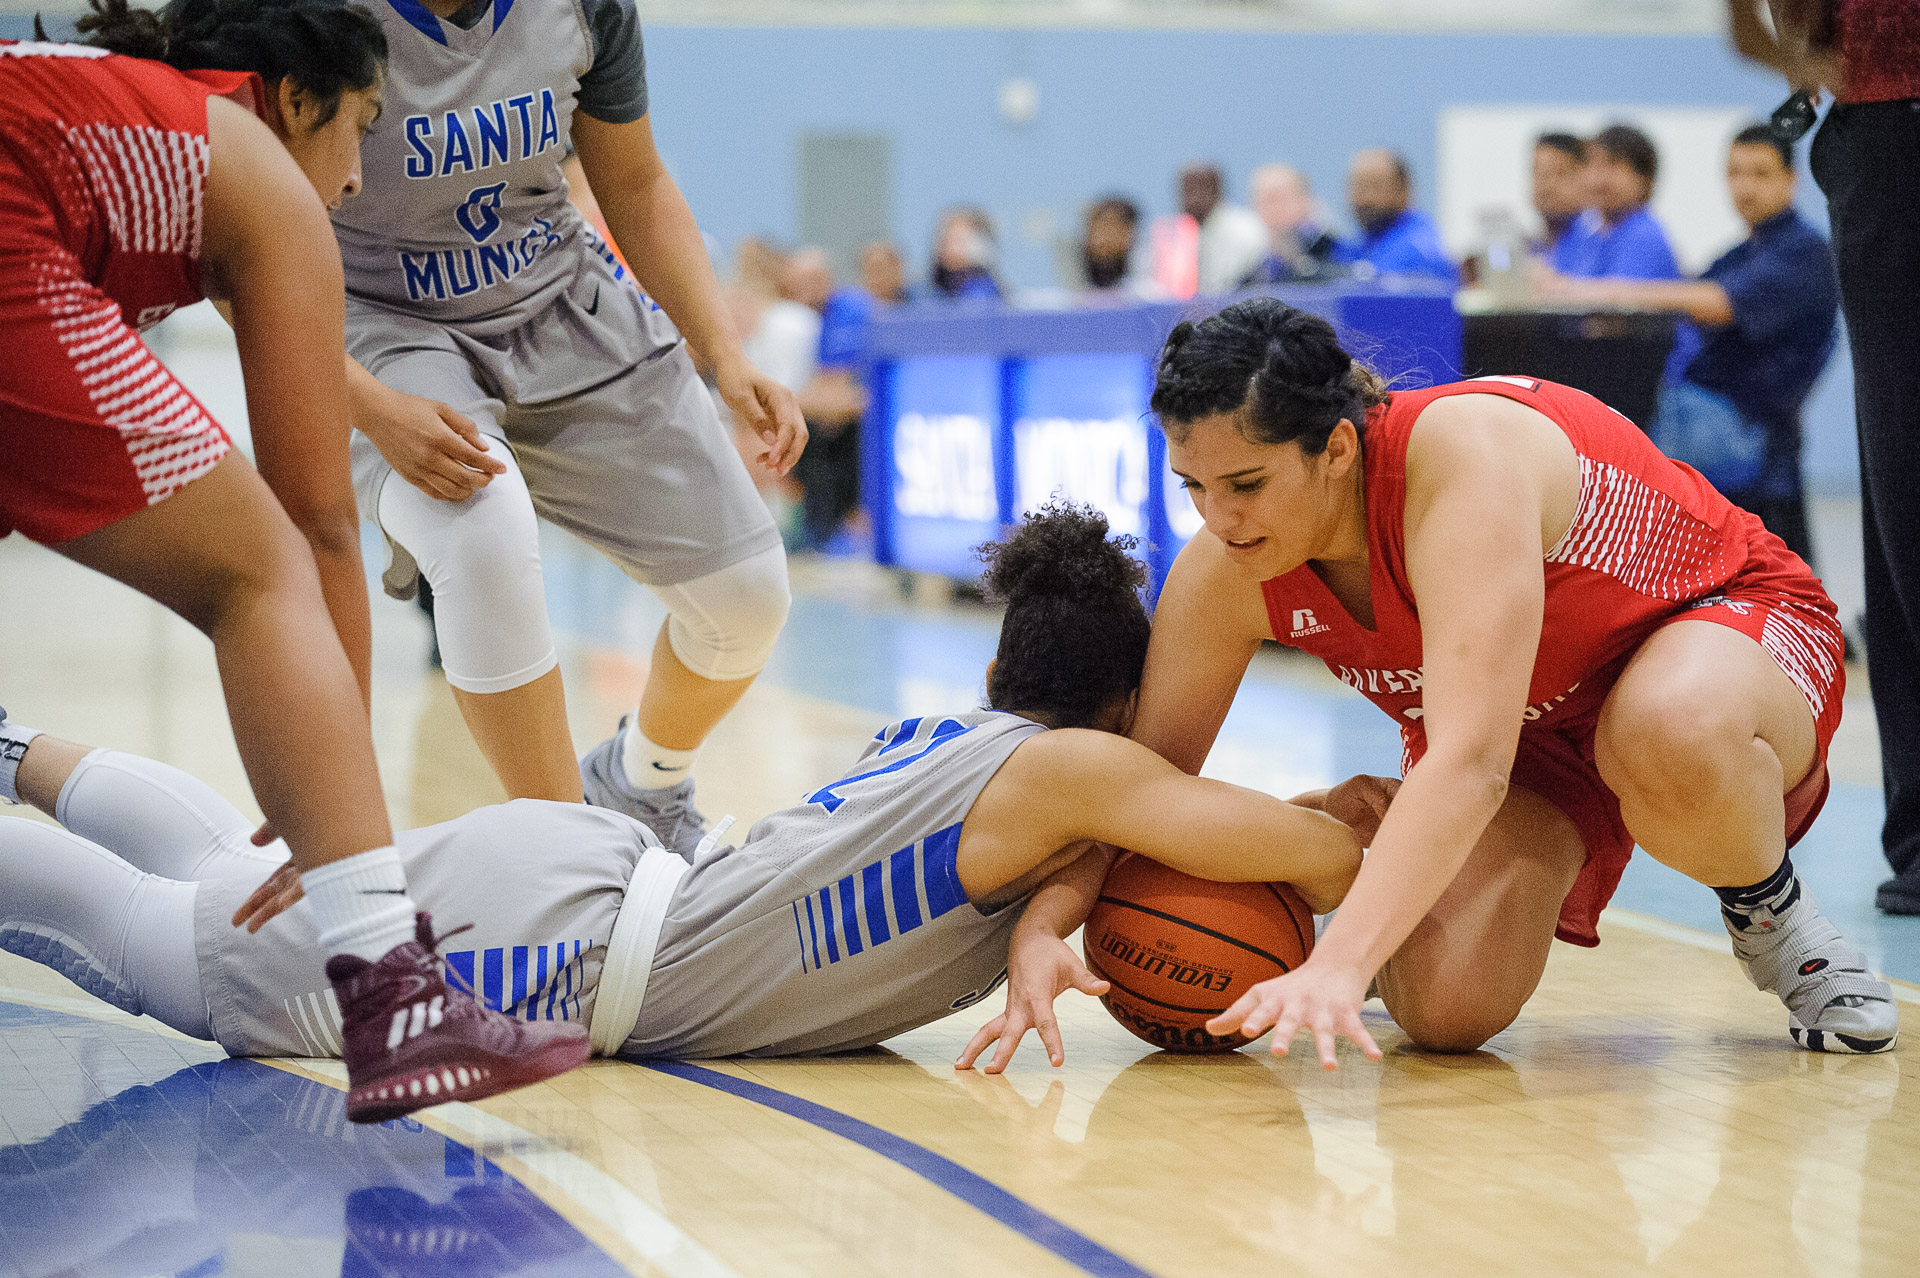  Guard Jinea Cole (22,Middle) of Santa Monica College fights for a loose ball against Brianna Mendez (24,Right) of Bakersfield College. The Santa Monica College Corsairs lose the game 62-72 to the Bakersfield College Renegades. The game was held at t